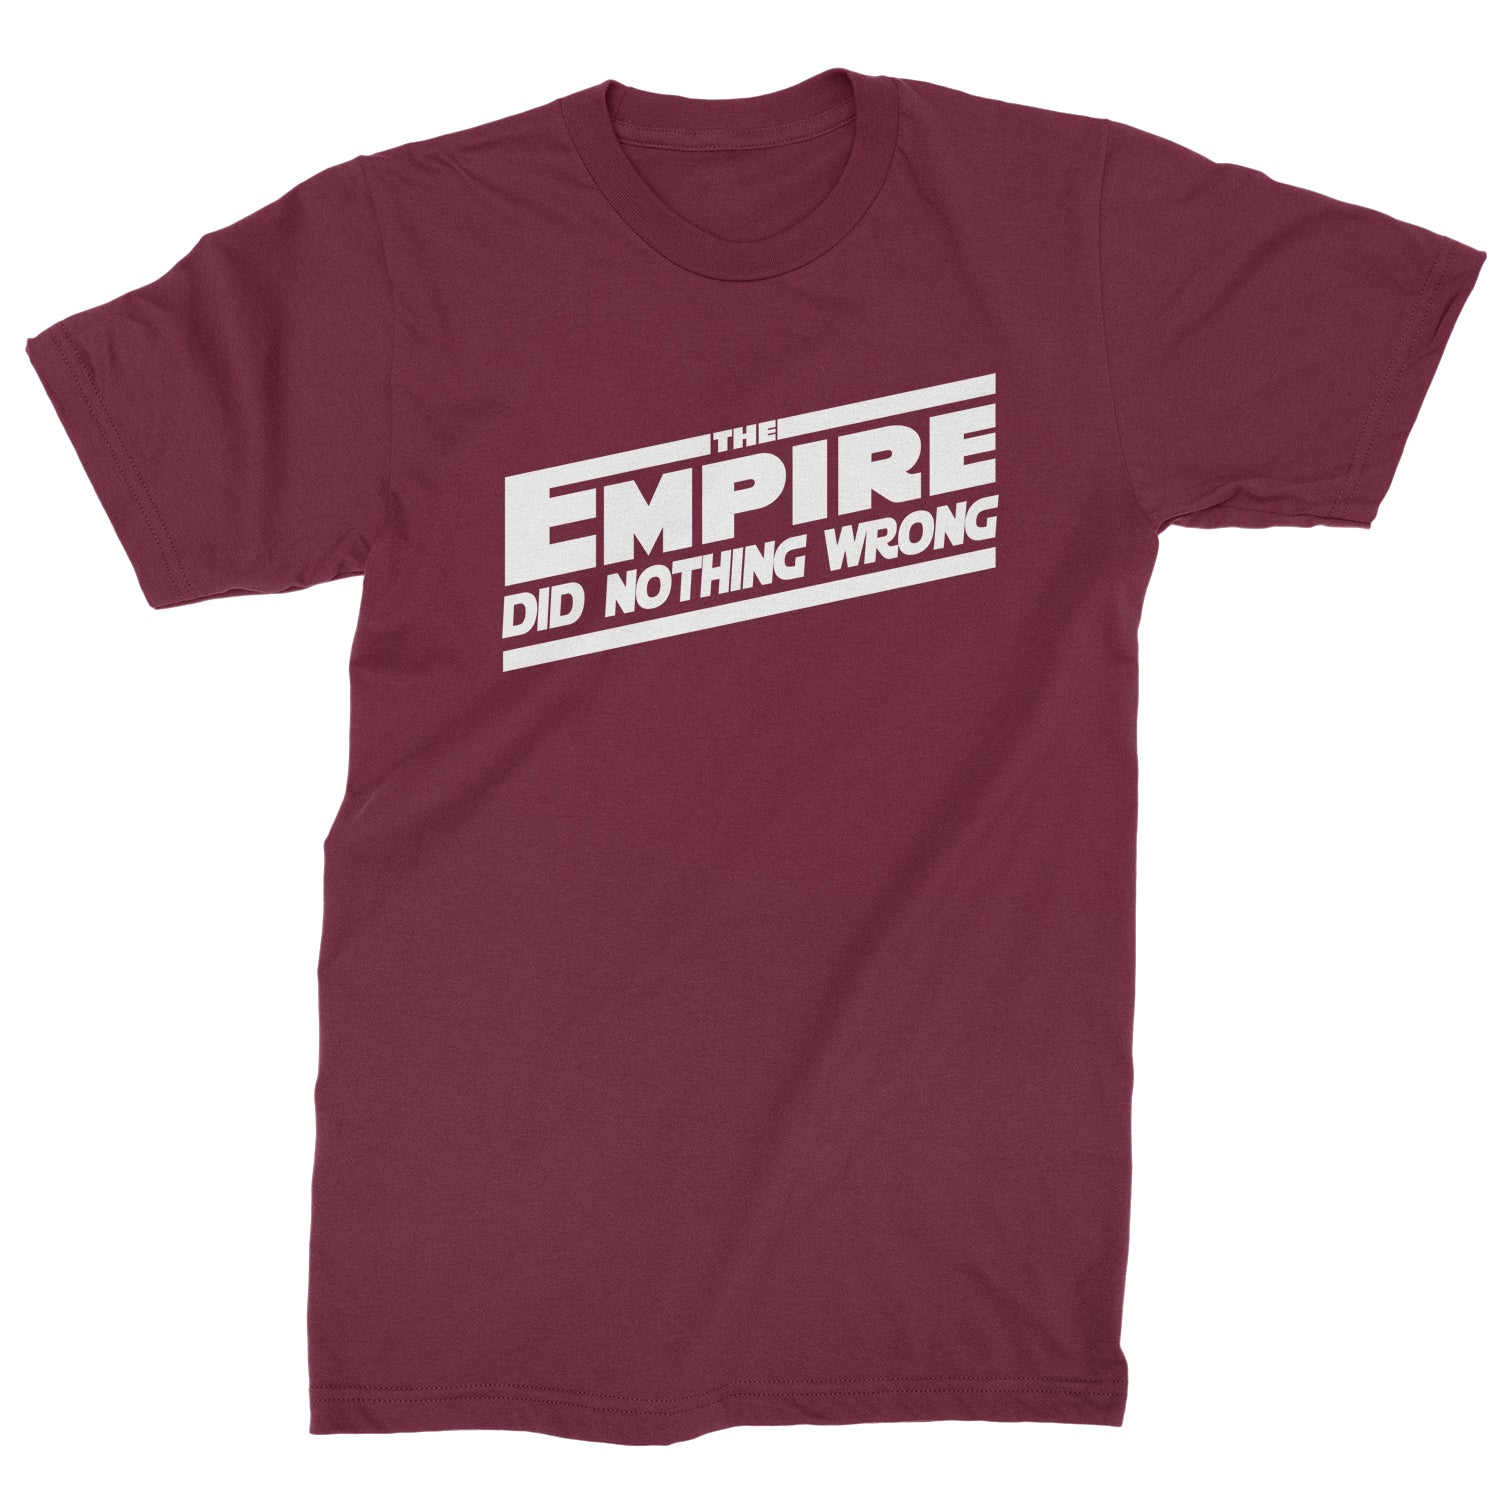 The Empire Did Nothing Wrong Mens T-shirt - Expression Tees